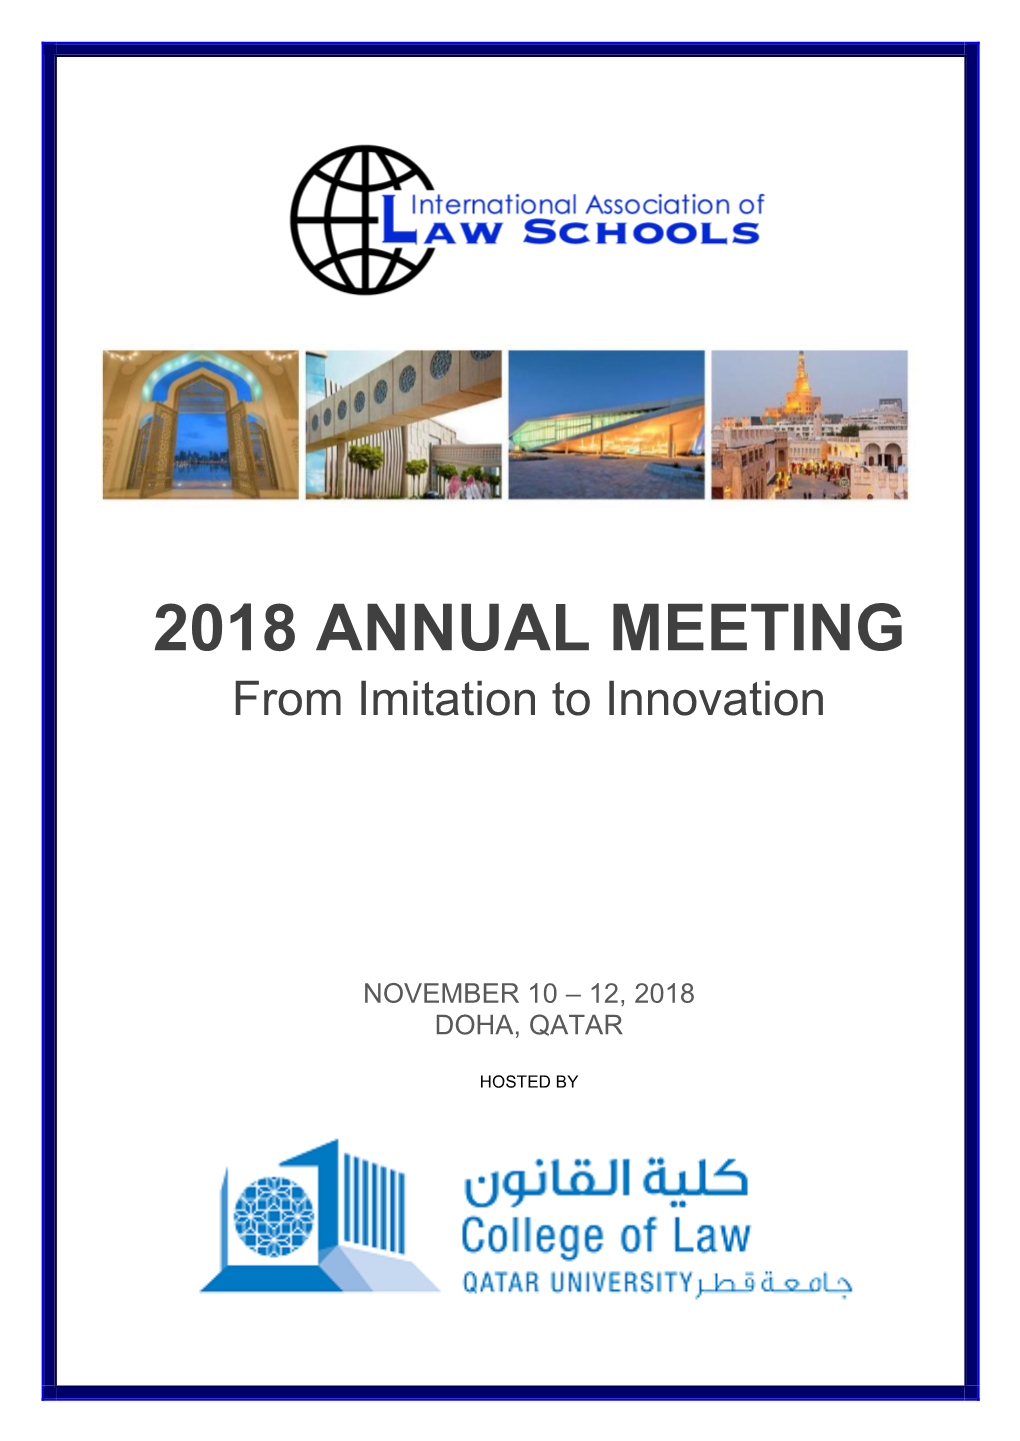 2018 ANNUAL MEETING from Imitation to Innovation